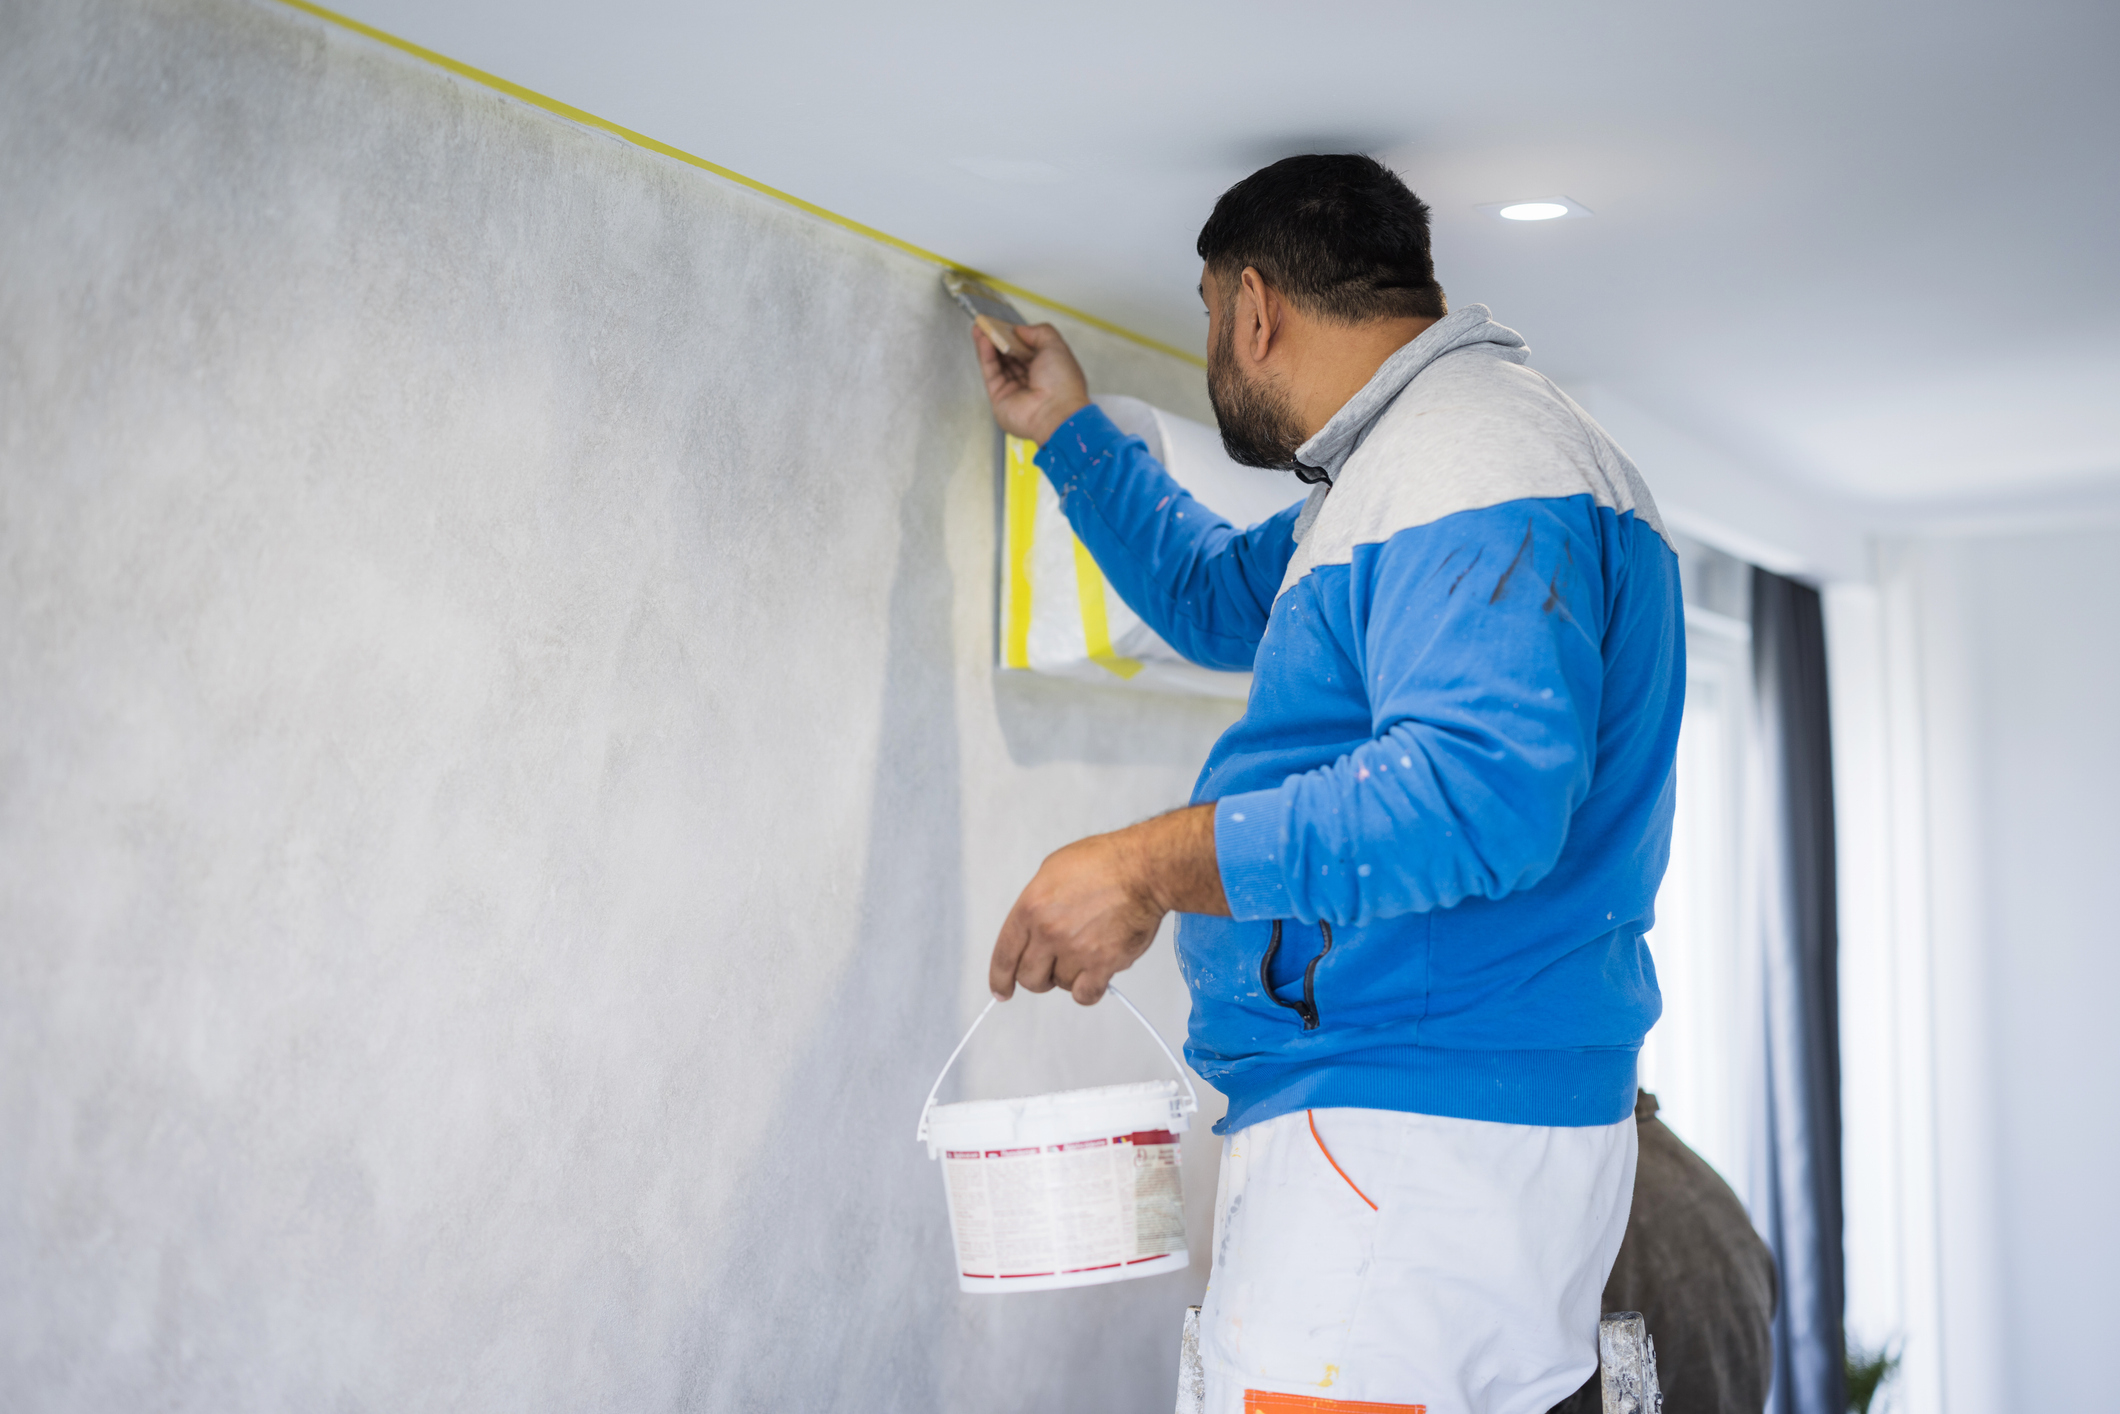 Person applying tape to a wall in preparation for painting, holding a paint bucket